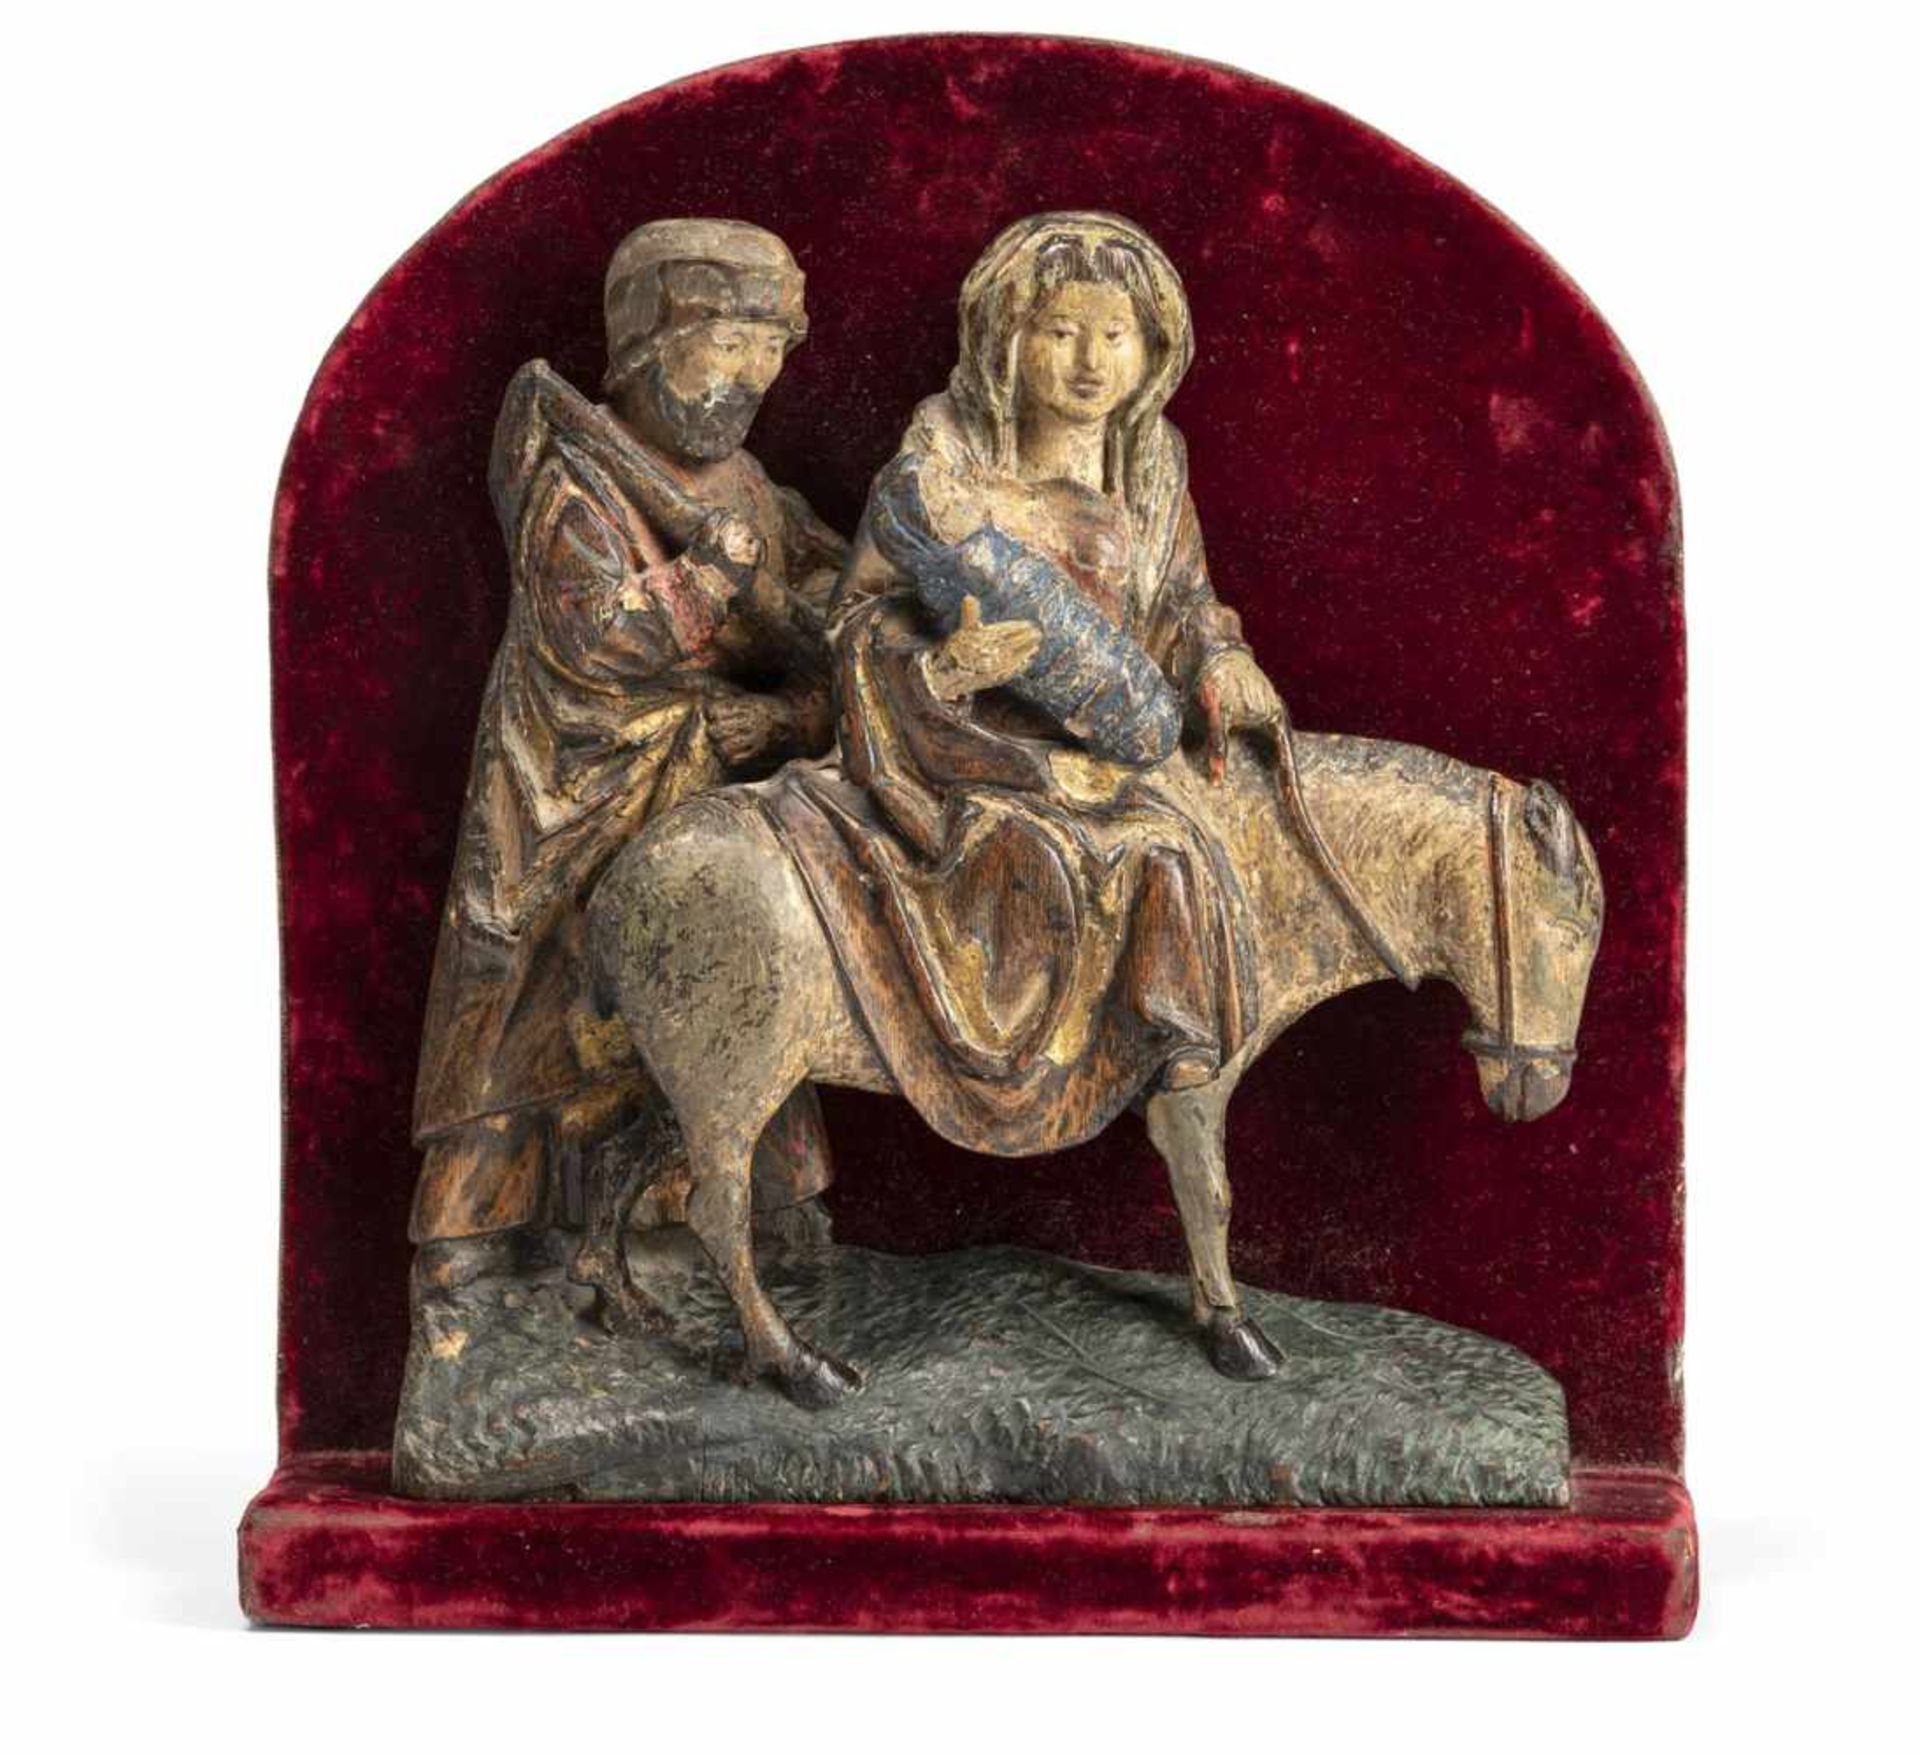 THE FLIGHT INTO EGYPT. Small oakwood relief carving depicting the Holy Family with a donkey on their